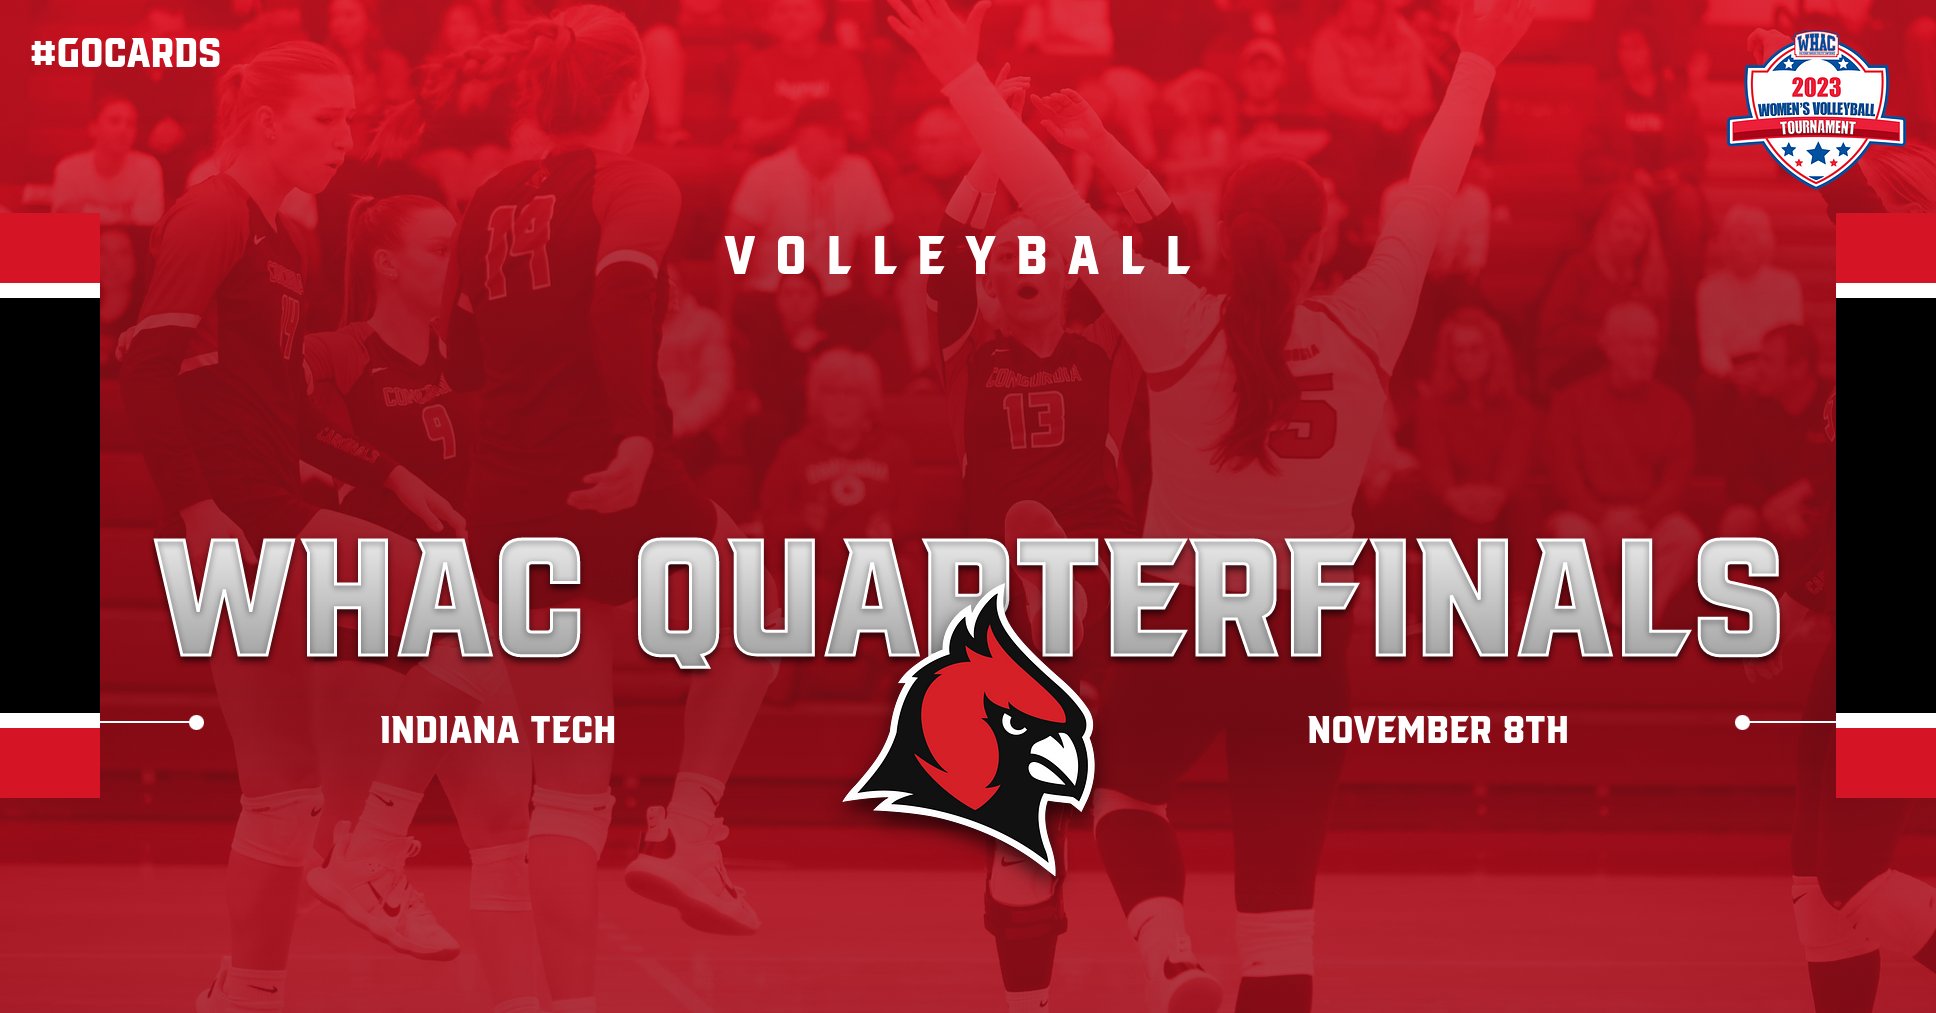 Volleyball set to face top seeded Indiana Tech in WHAC Quarterfinals